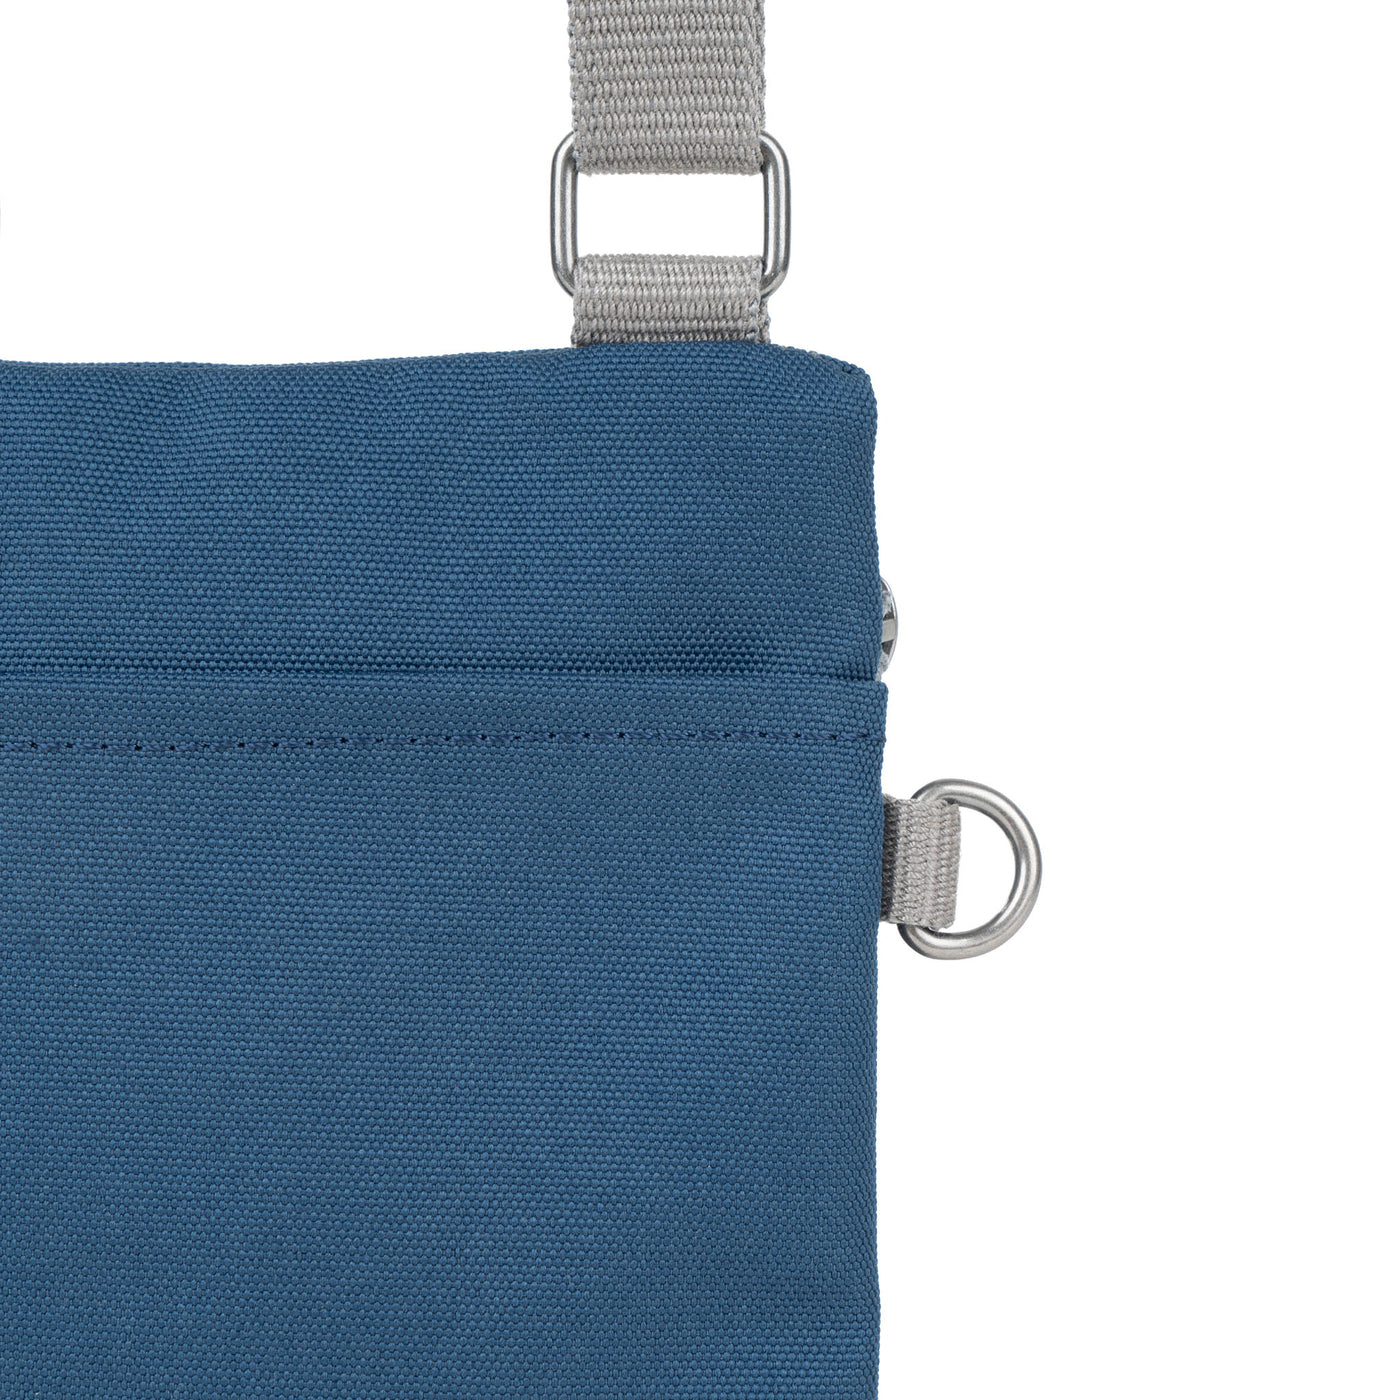 Chelsea Deep Blue Recycled Canvas